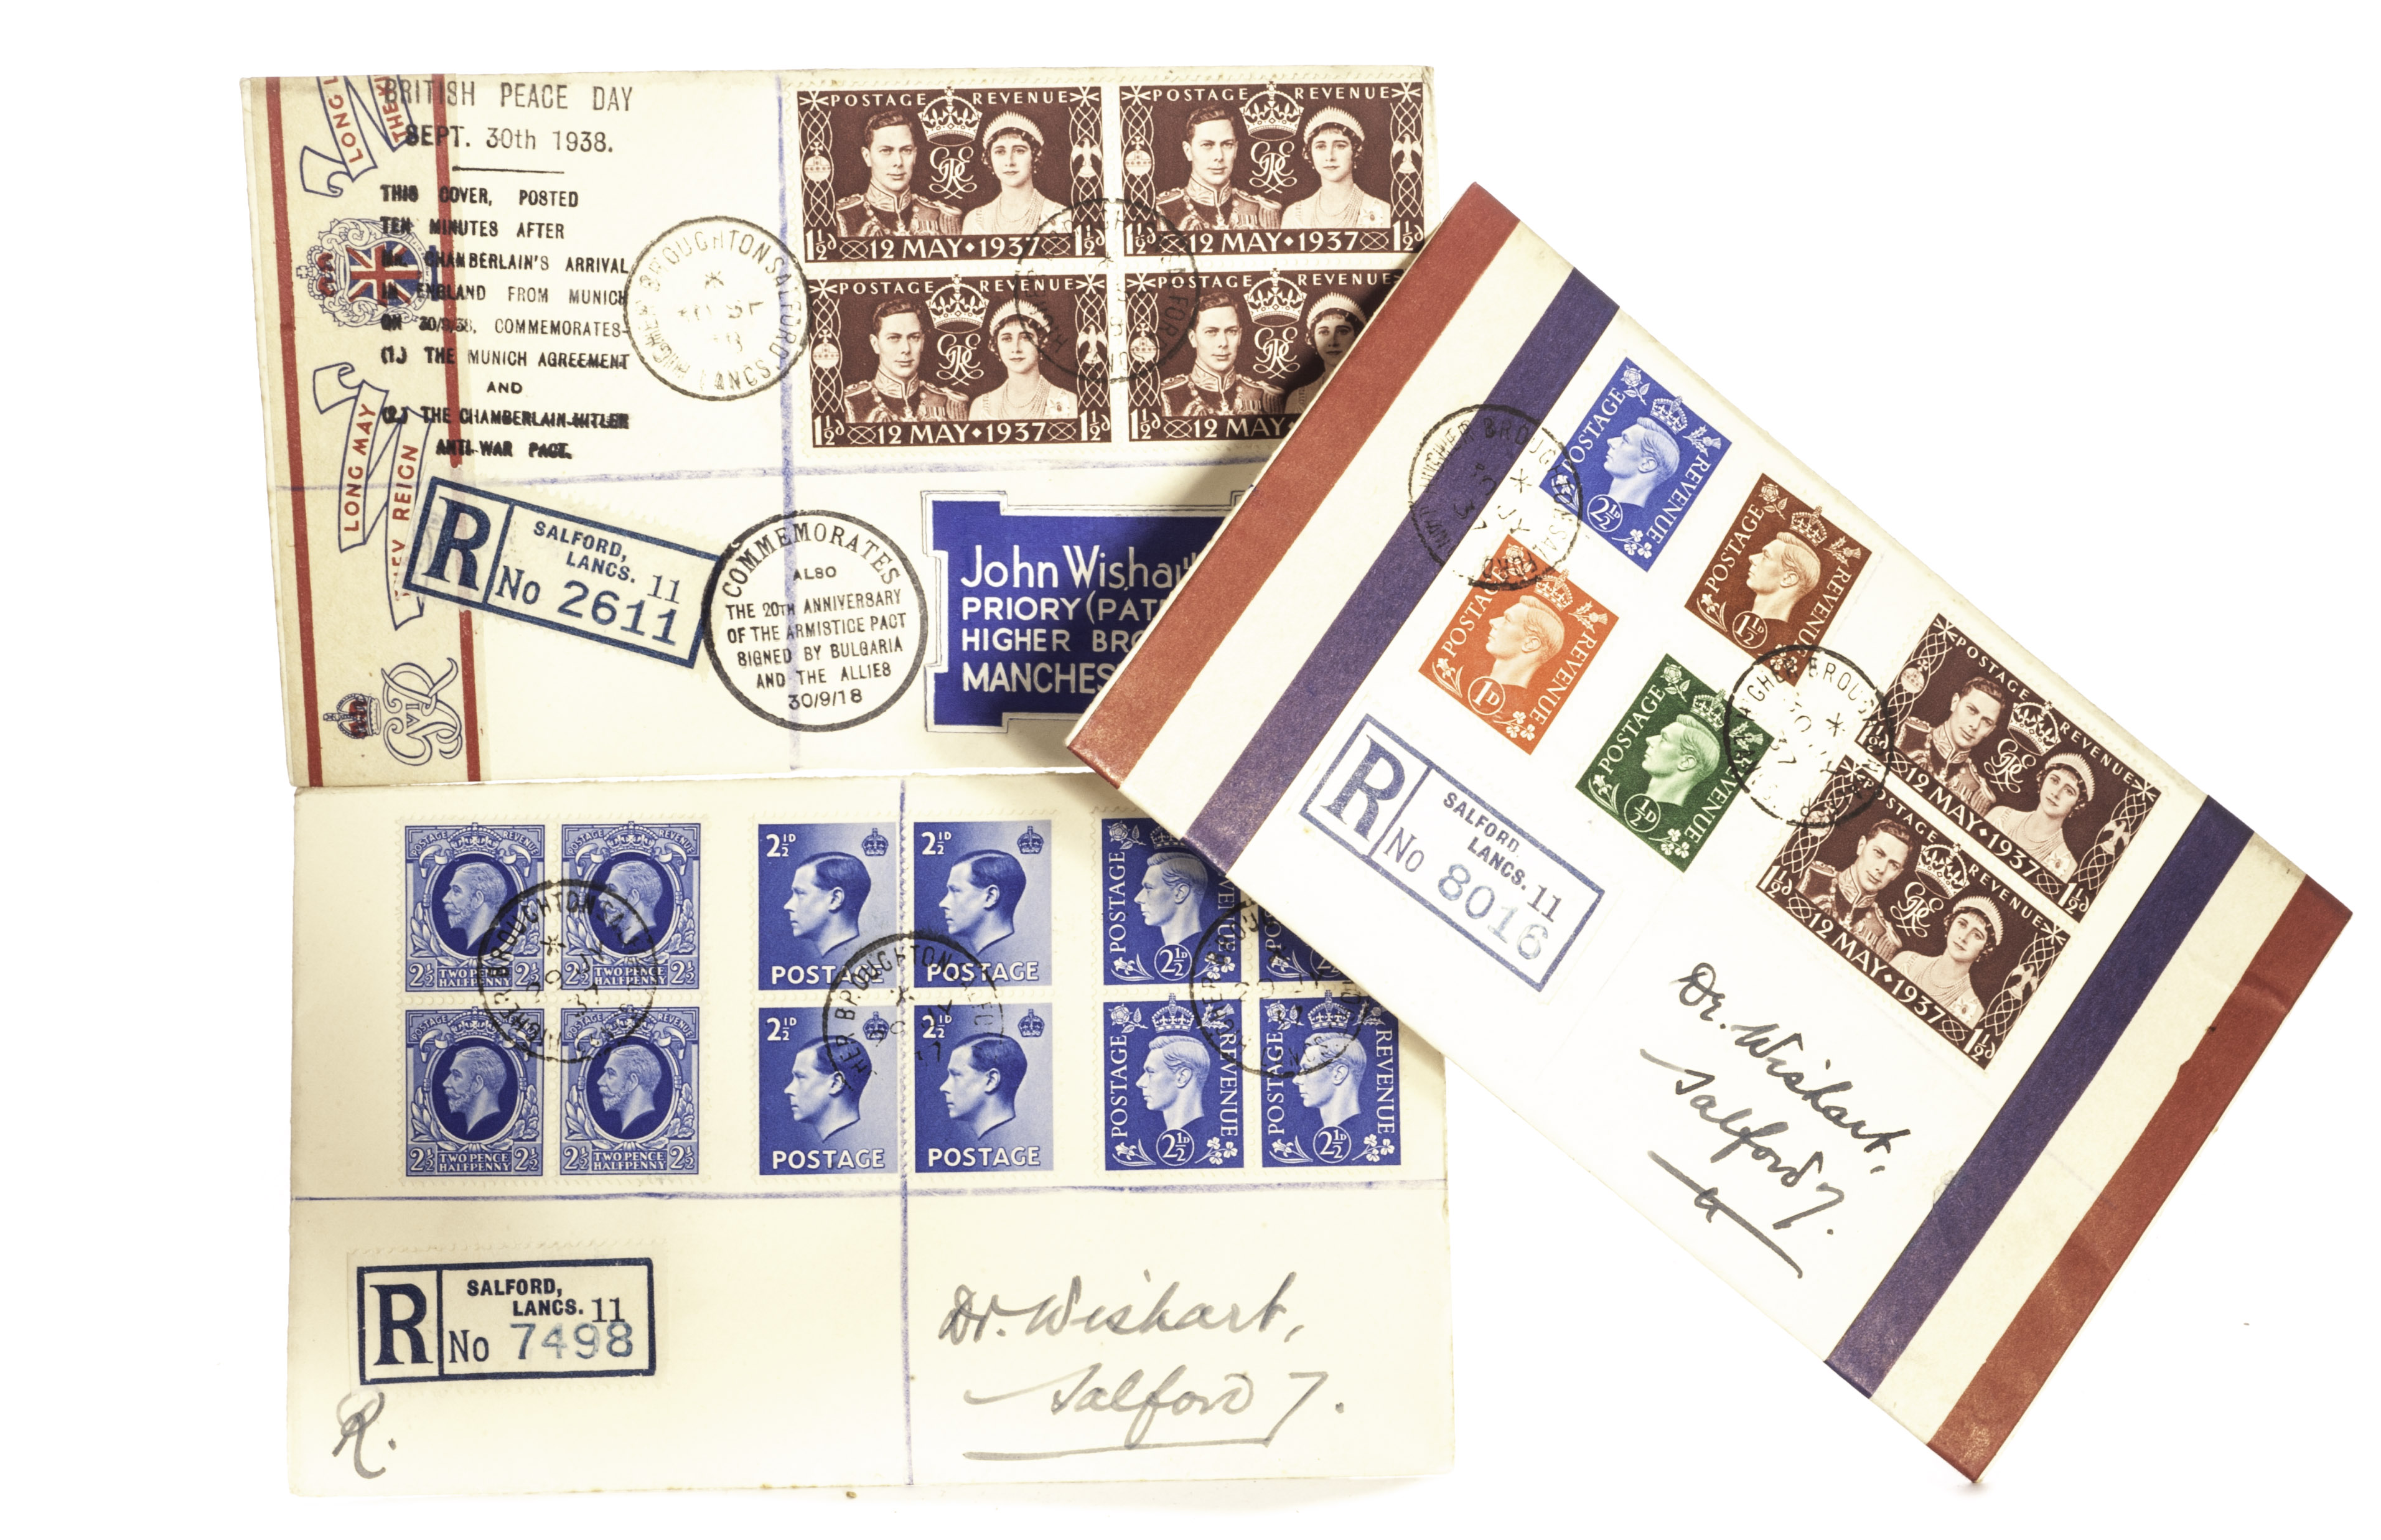 Stamps A box of commemorative covers for the British Peace Day, 30th Sept 1938. These covers were